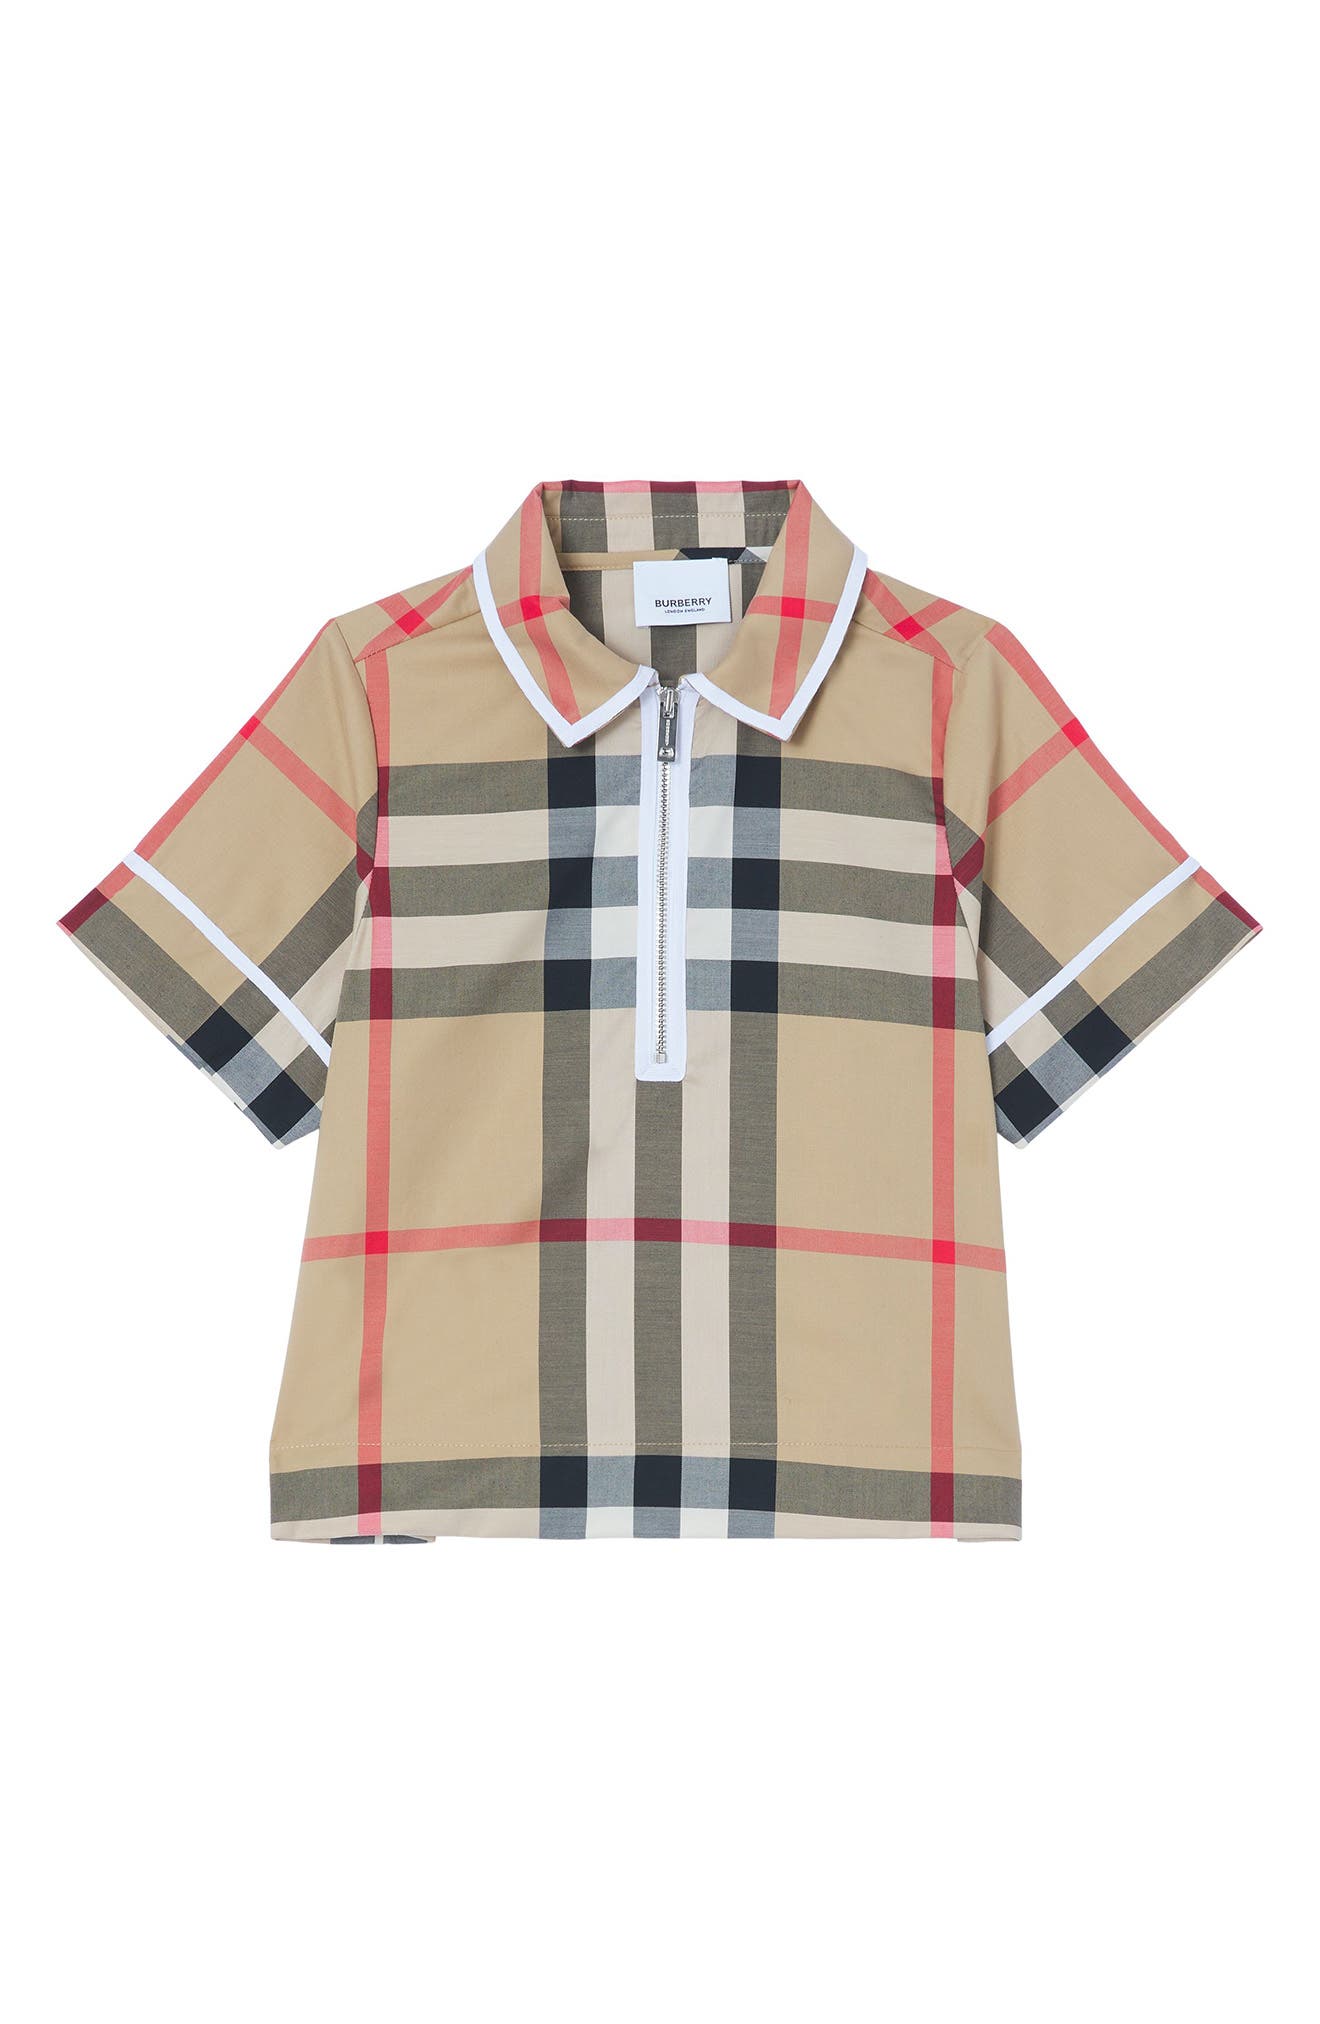 Burberry Kids' Thalia Check Stretch Cotton Zip Shirt in Archive Beige Ip Chk at Nordstrom, Size 4Y Us